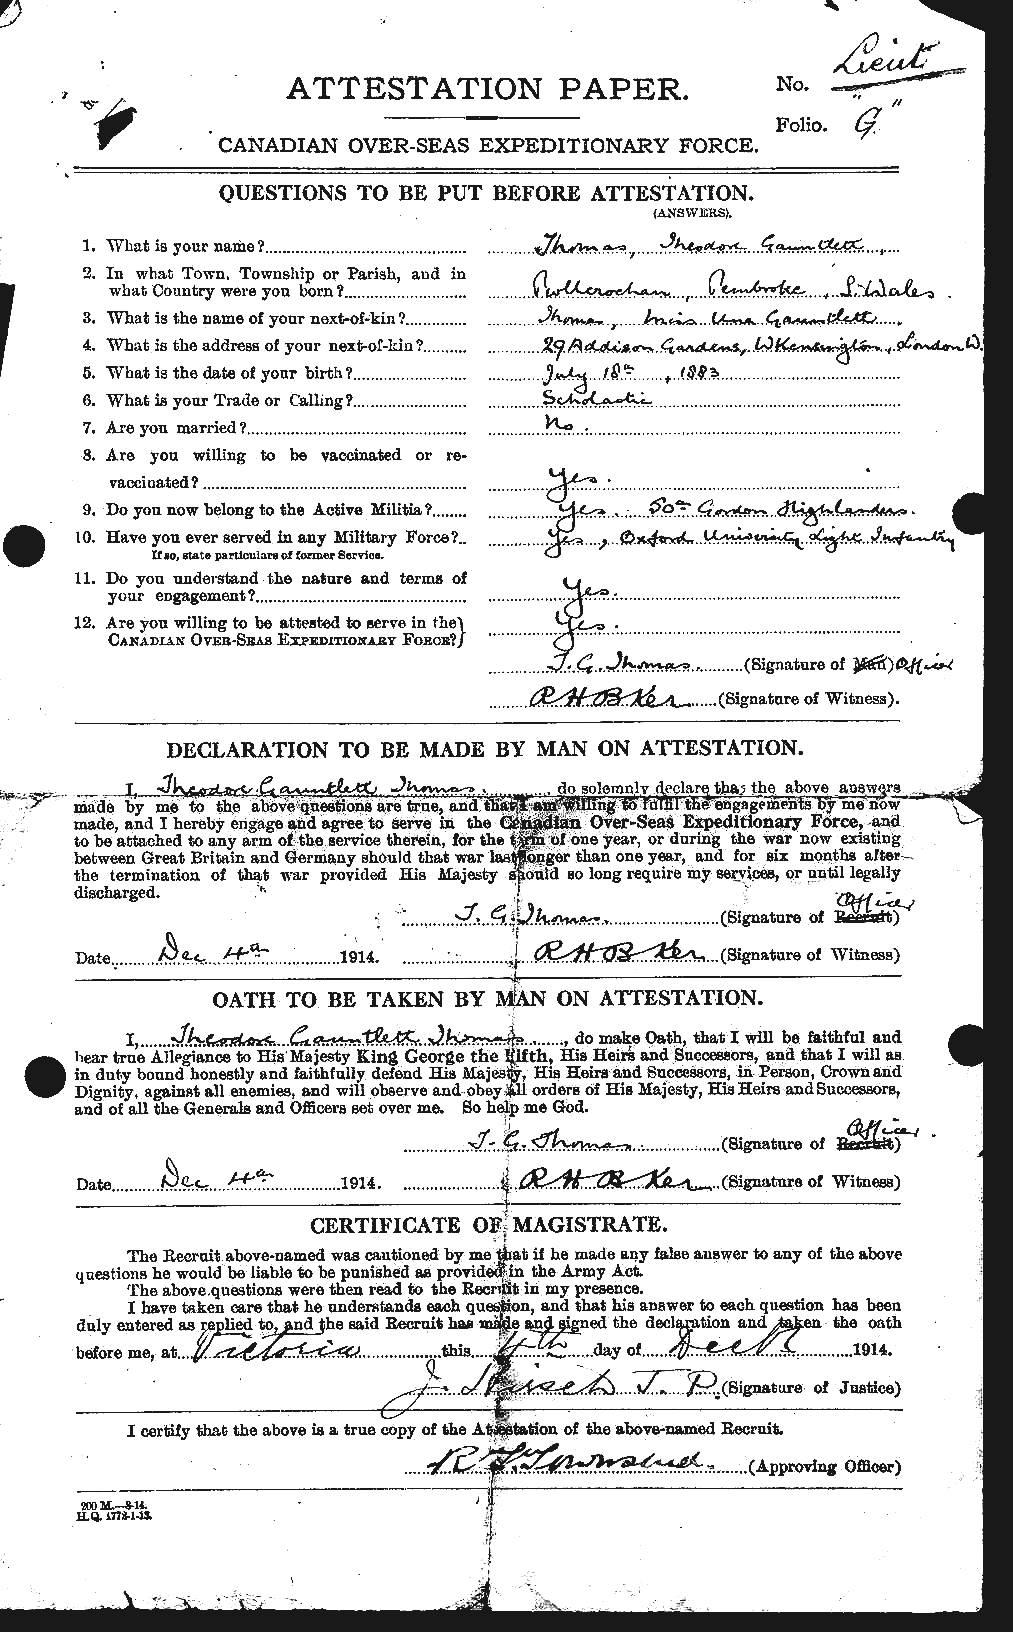 Personnel Records of the First World War - CEF 632694a